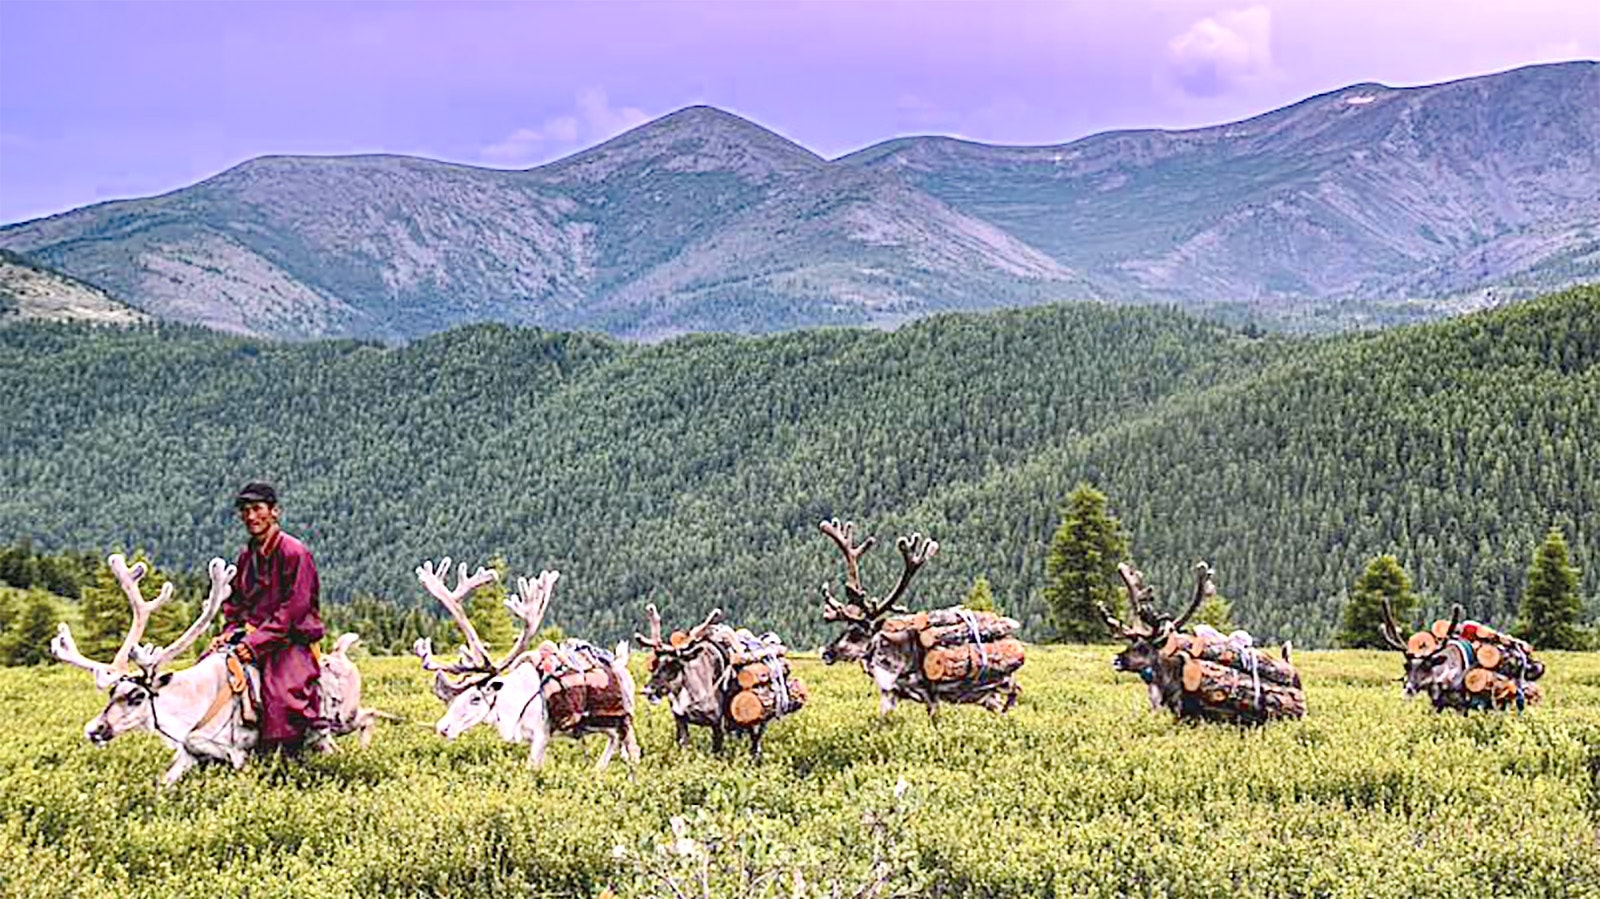 Mongolians packed and rode male reindeer.